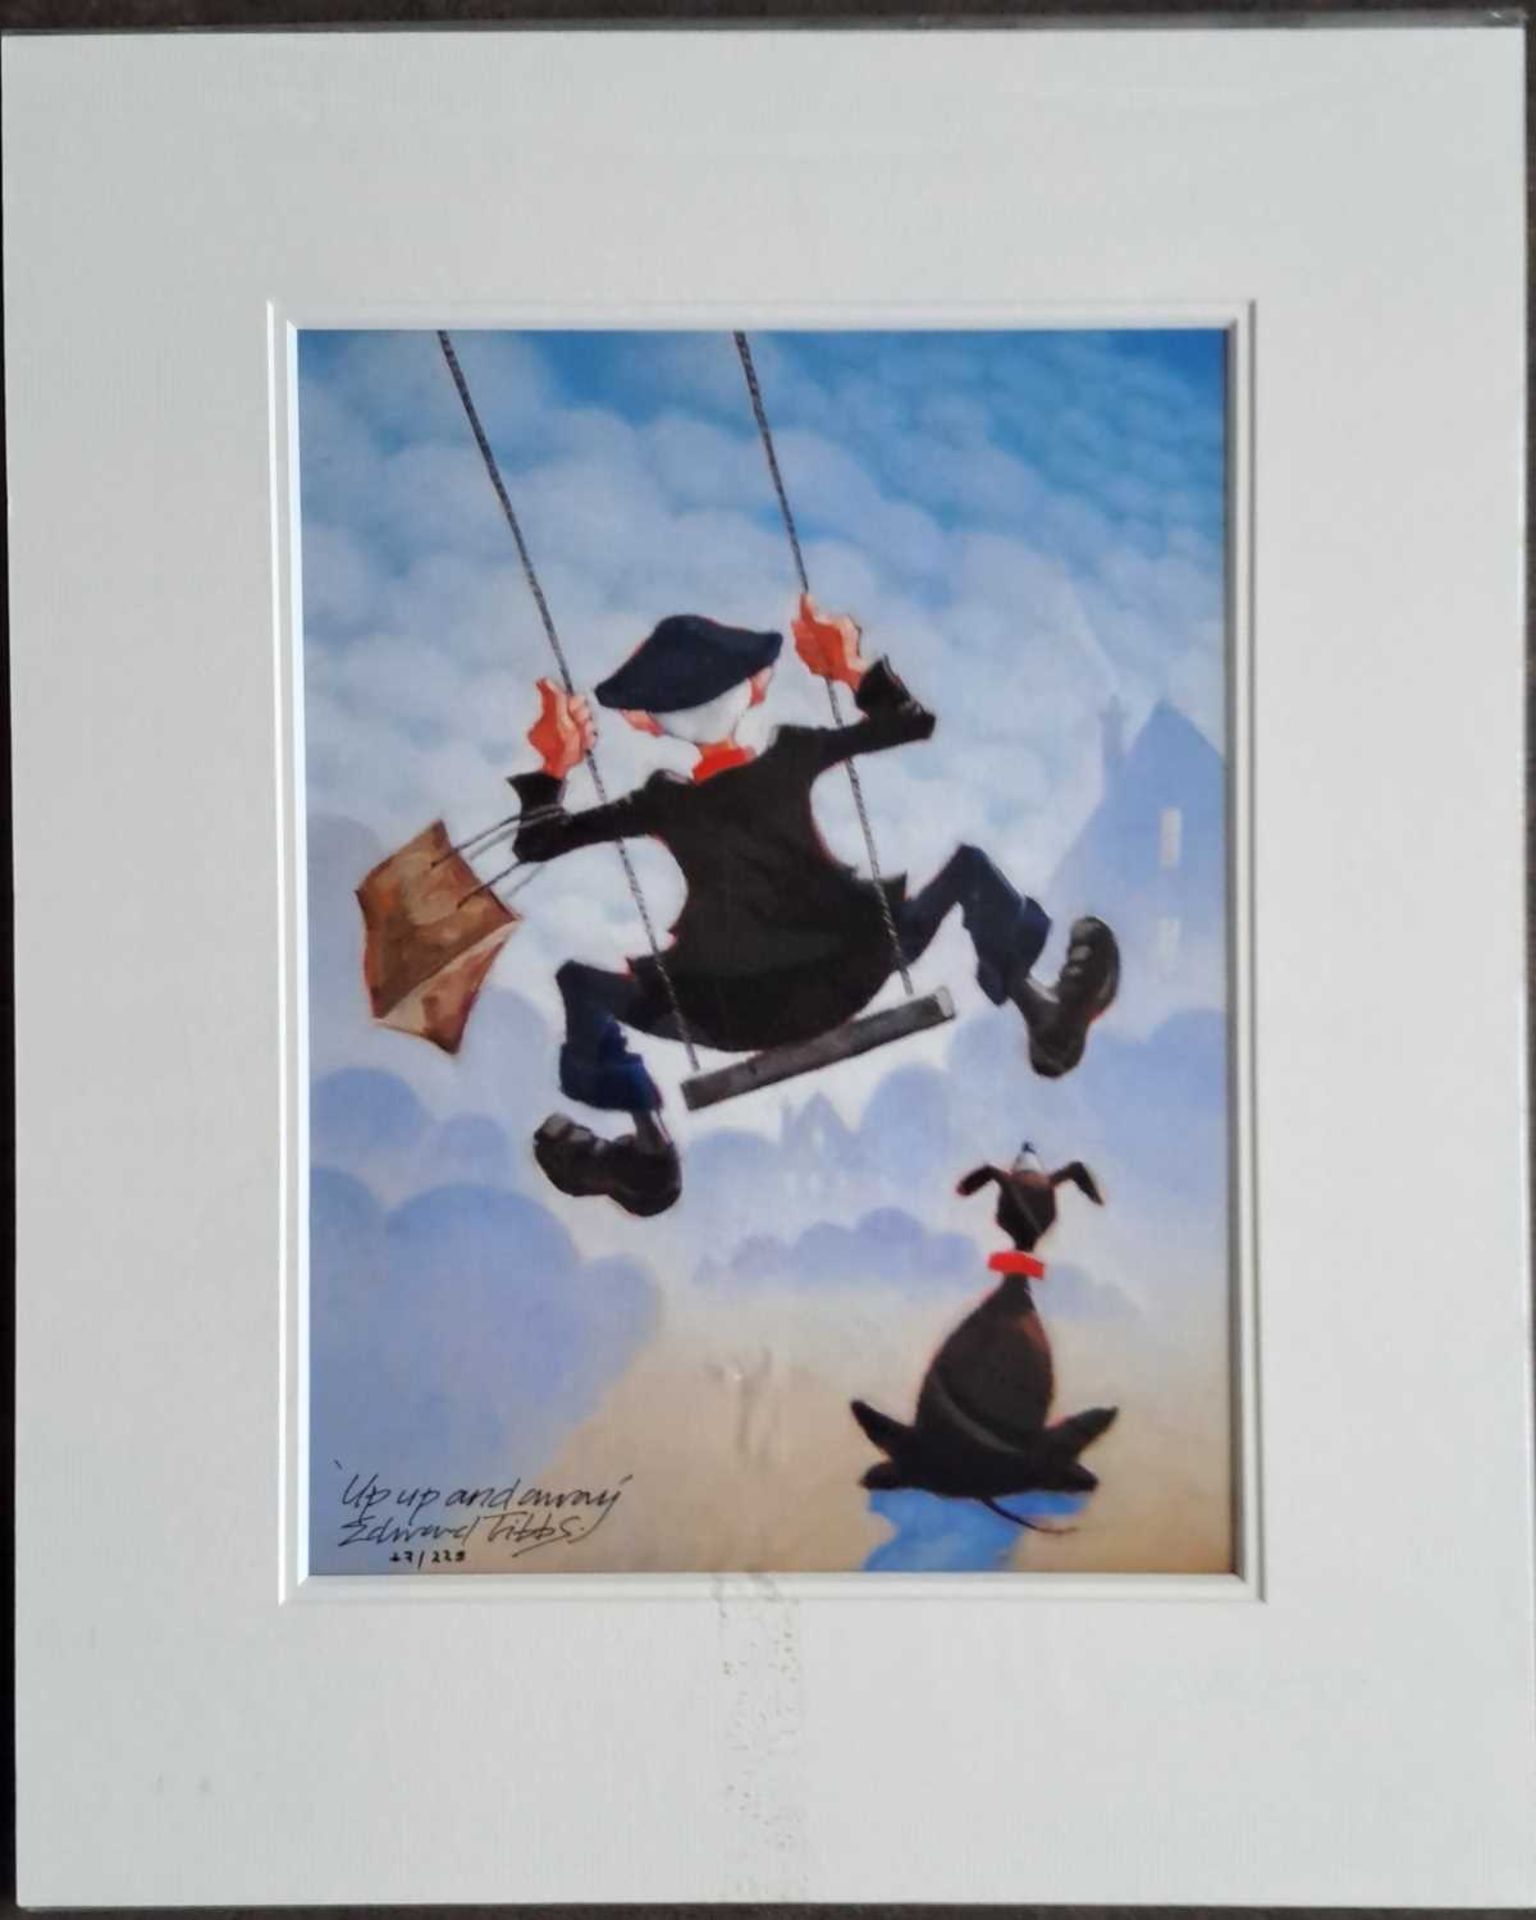 EDWARD TIBBS - UP UP AND AWAY, LIMITED EDITION 27/225. 520 x 420 mm